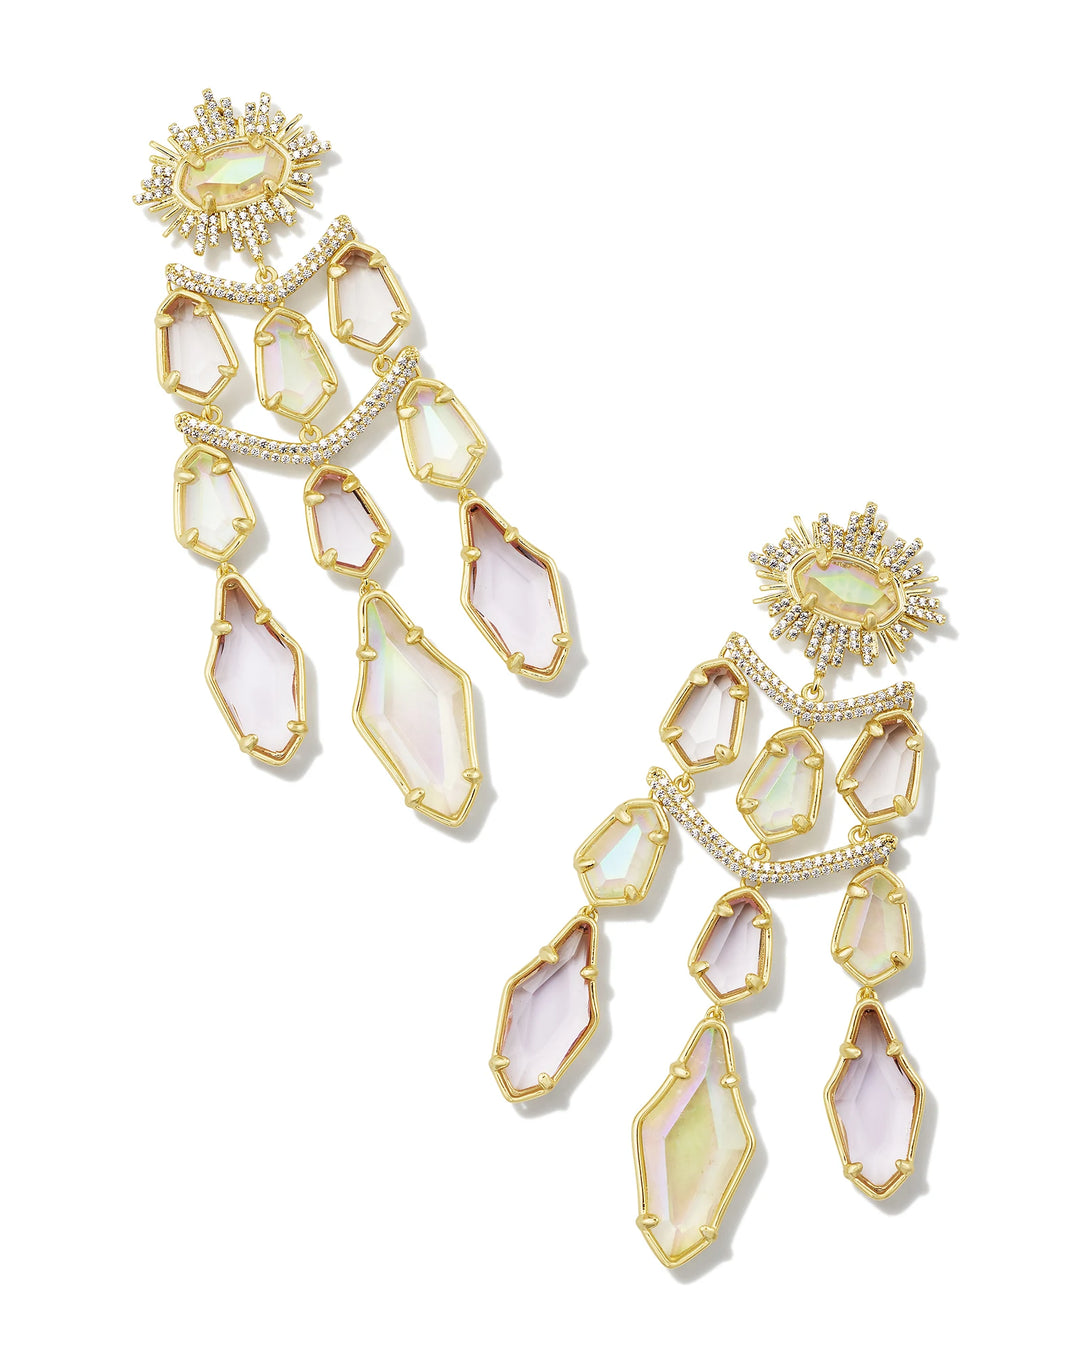 Kendra Scott Alexandria Gold Tiered Statement Earrings in White Mix